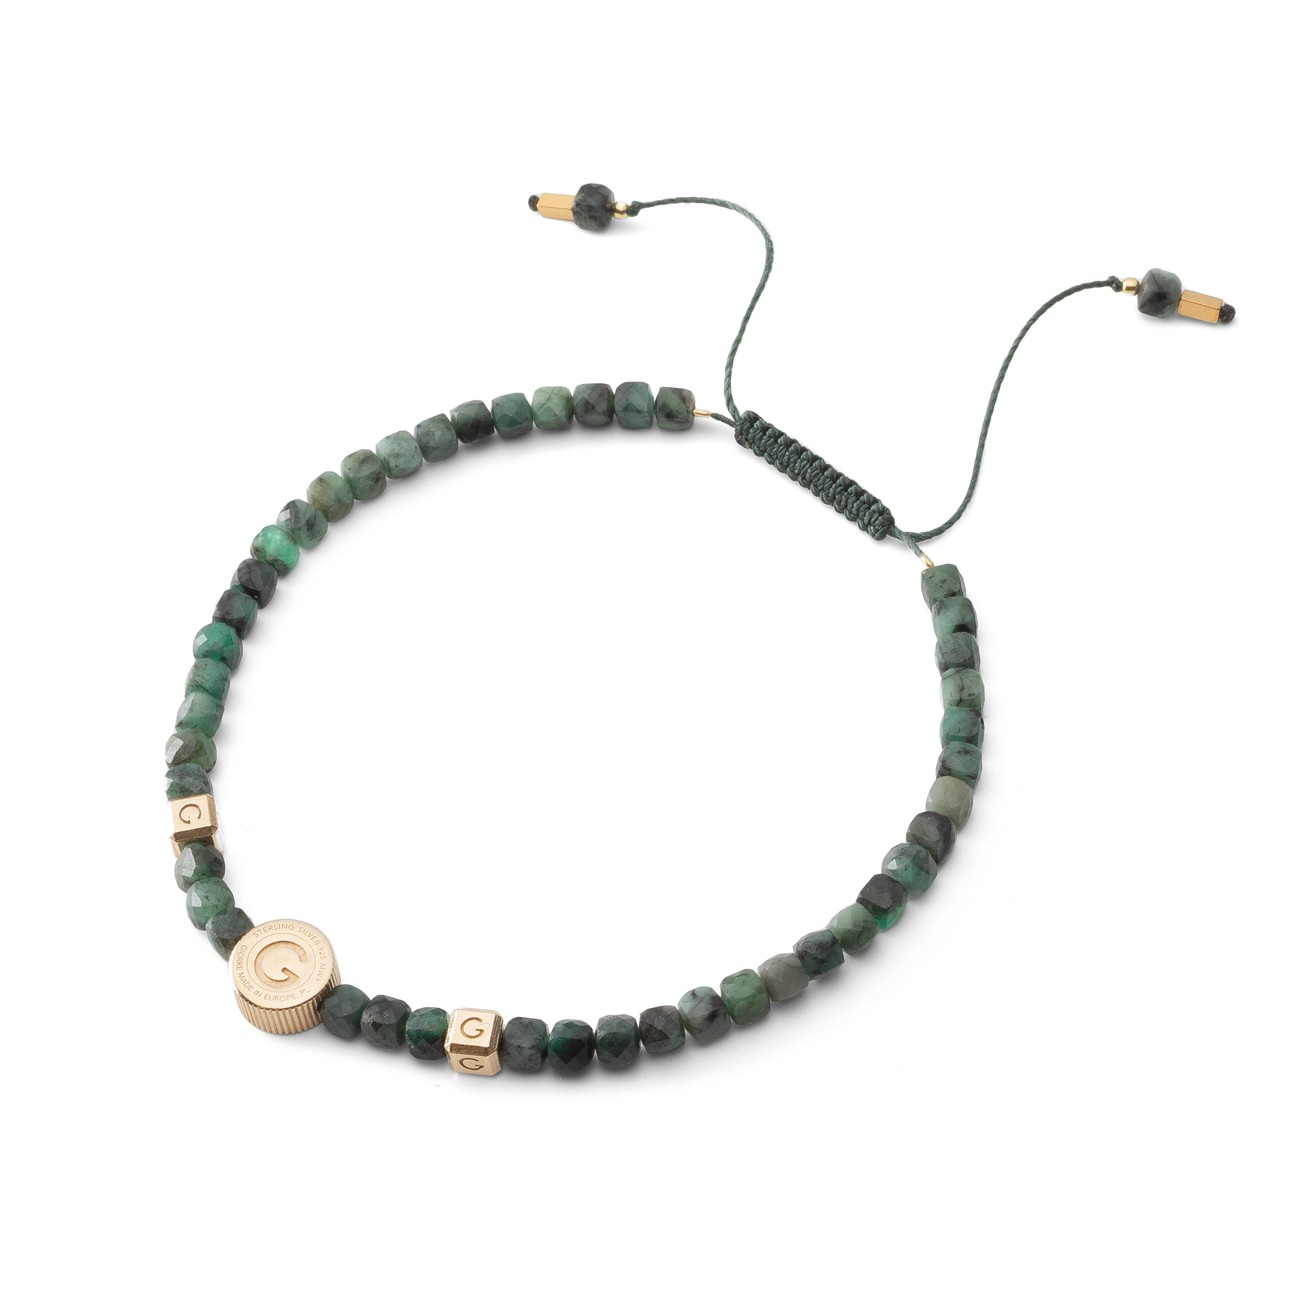 Silver anklet with natural stone - emerald